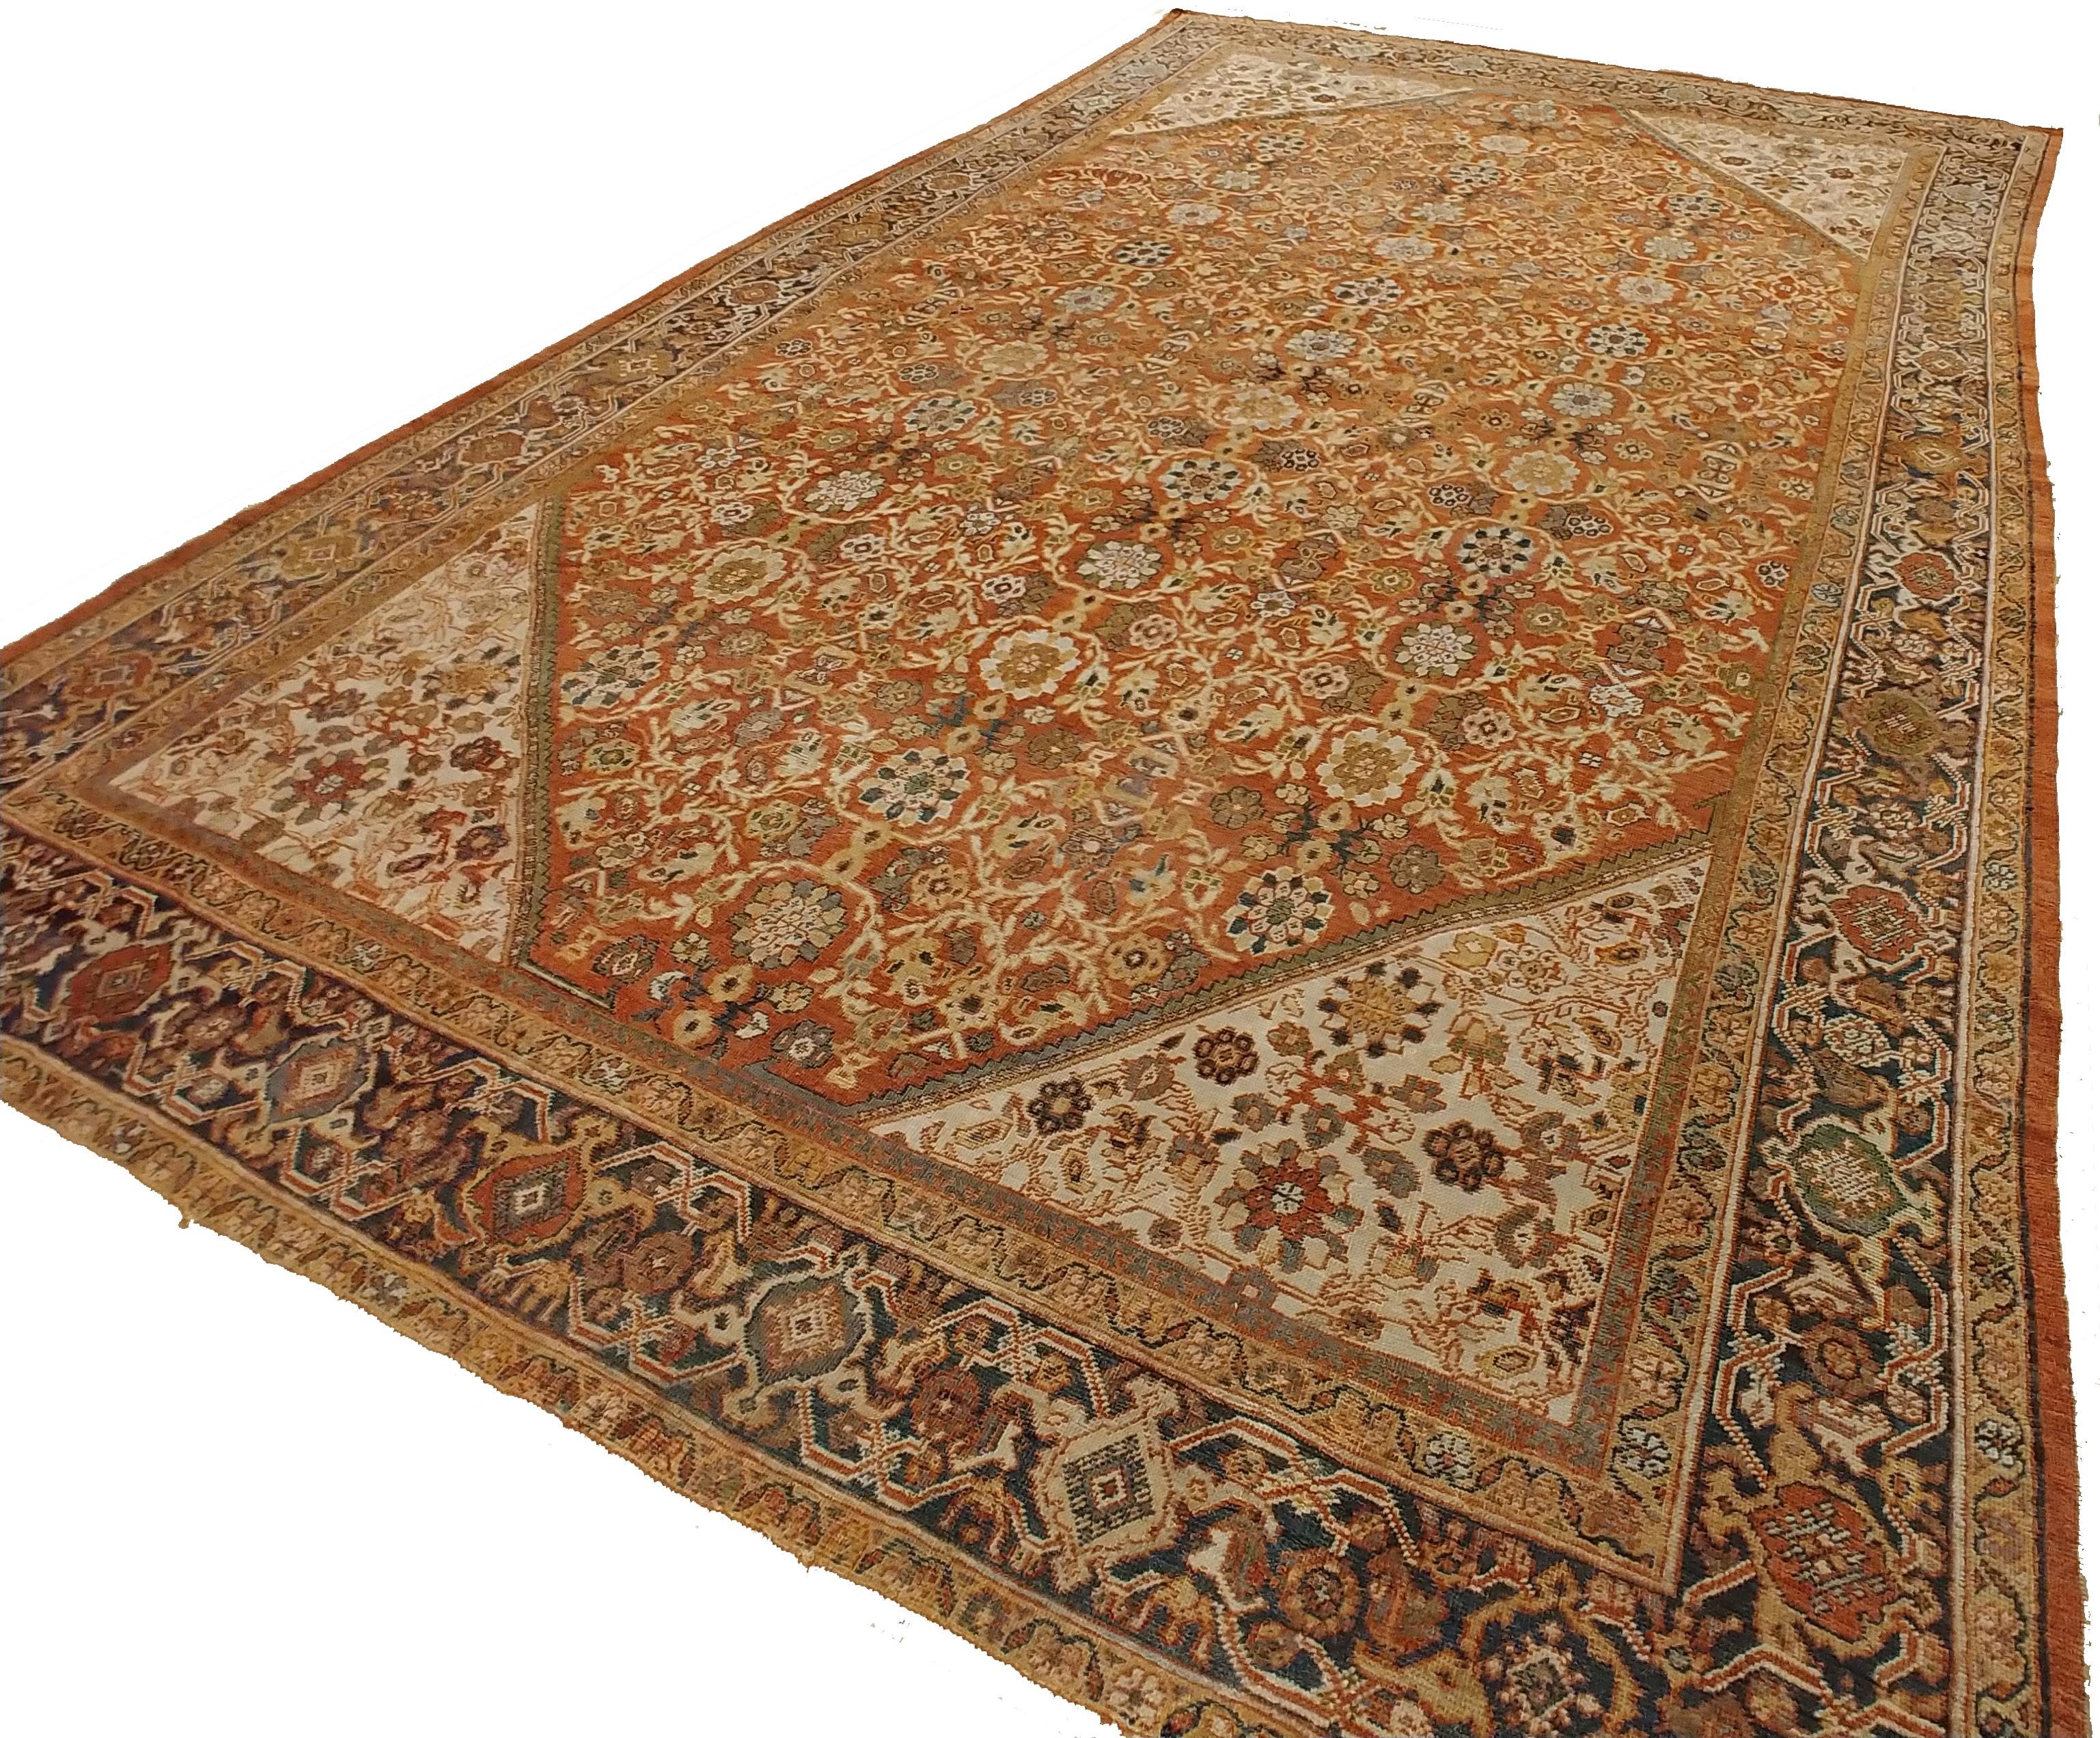 Early 20th Century Hand Knotted Antique Persian Sultanabad Carpet, circa 1900